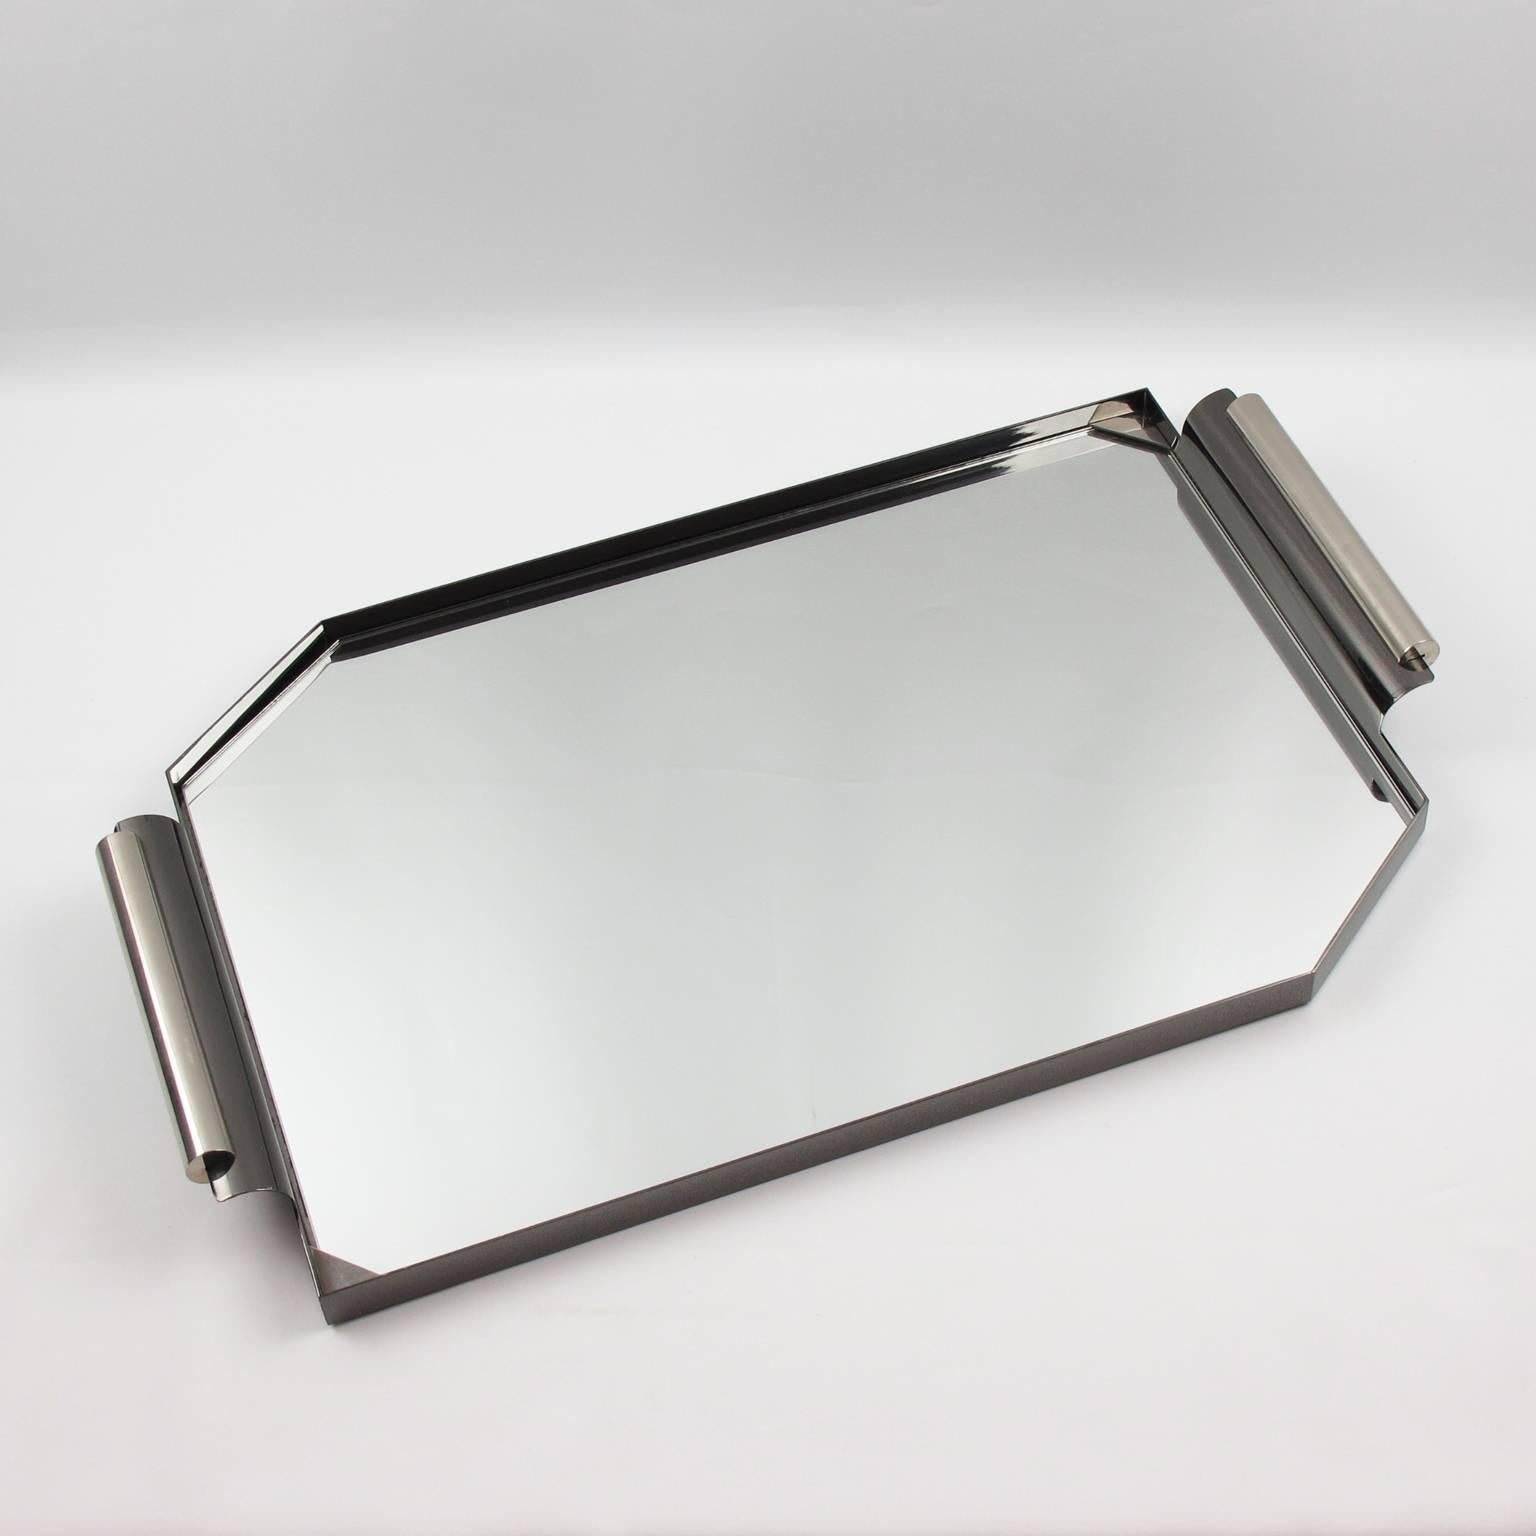 French Art Deco Machine Age Chrome & Mirror Cocktail Serving Tray, France, circa 1940s